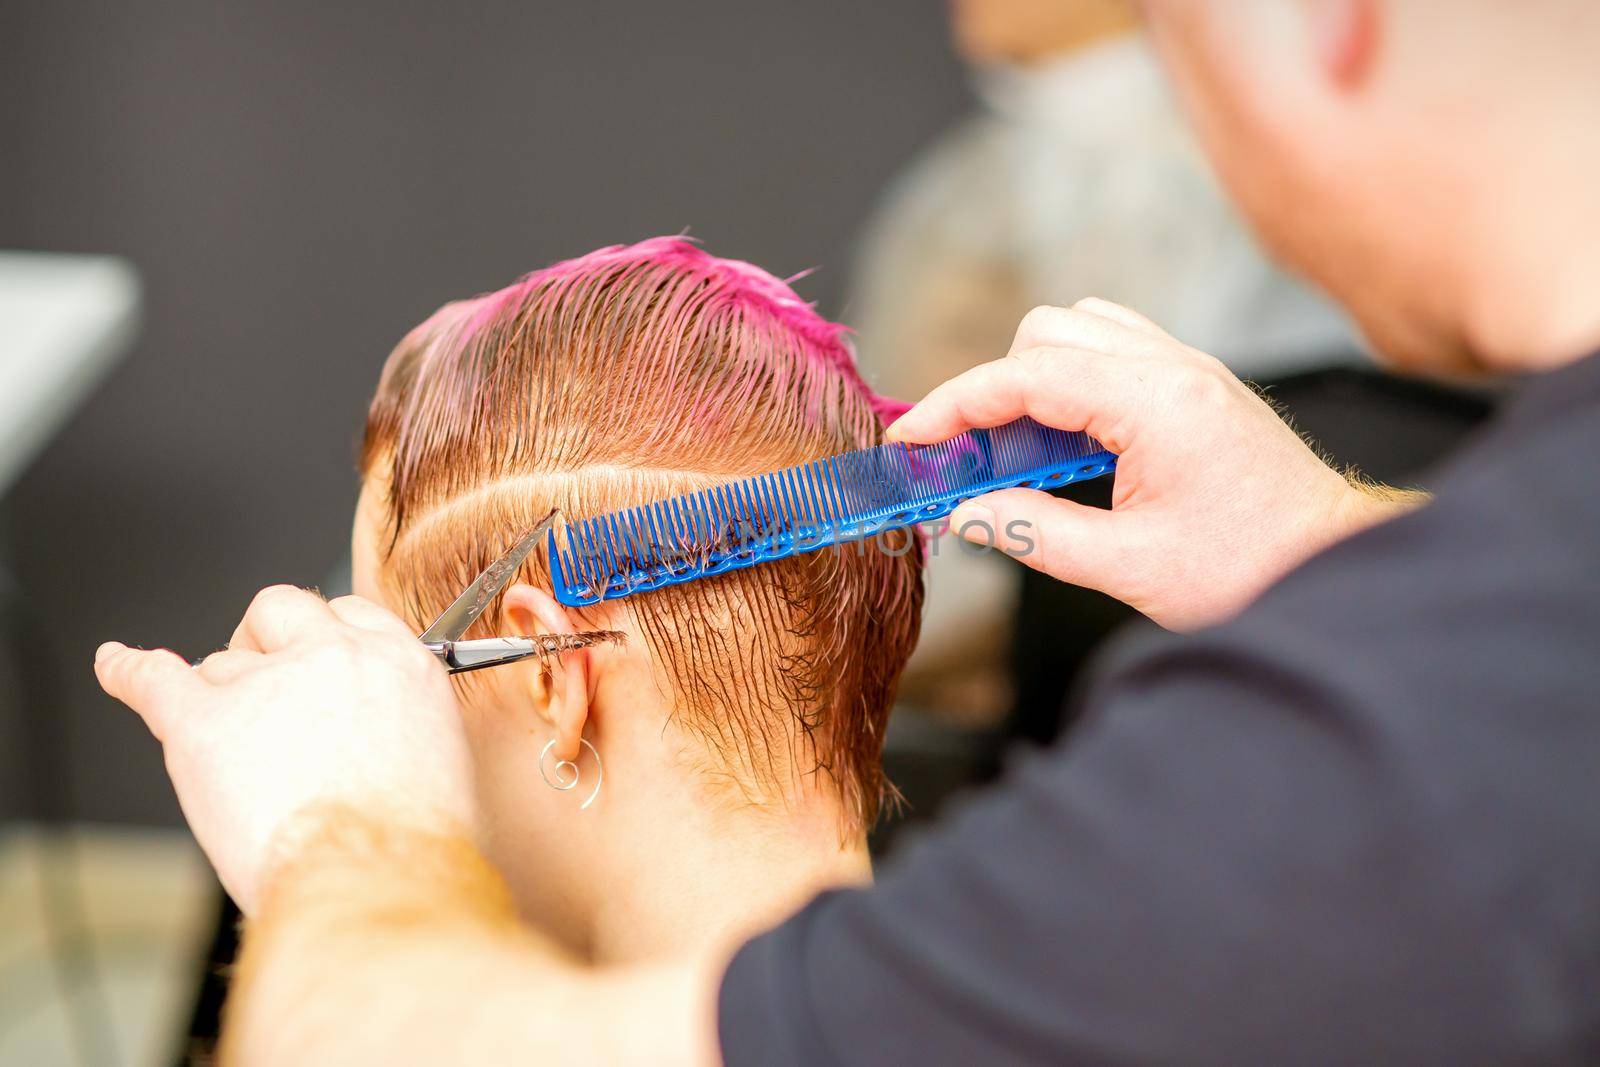 Haircut of dyed short pink wet hair of young caucasian woman by a male hairdresser in a barbershop